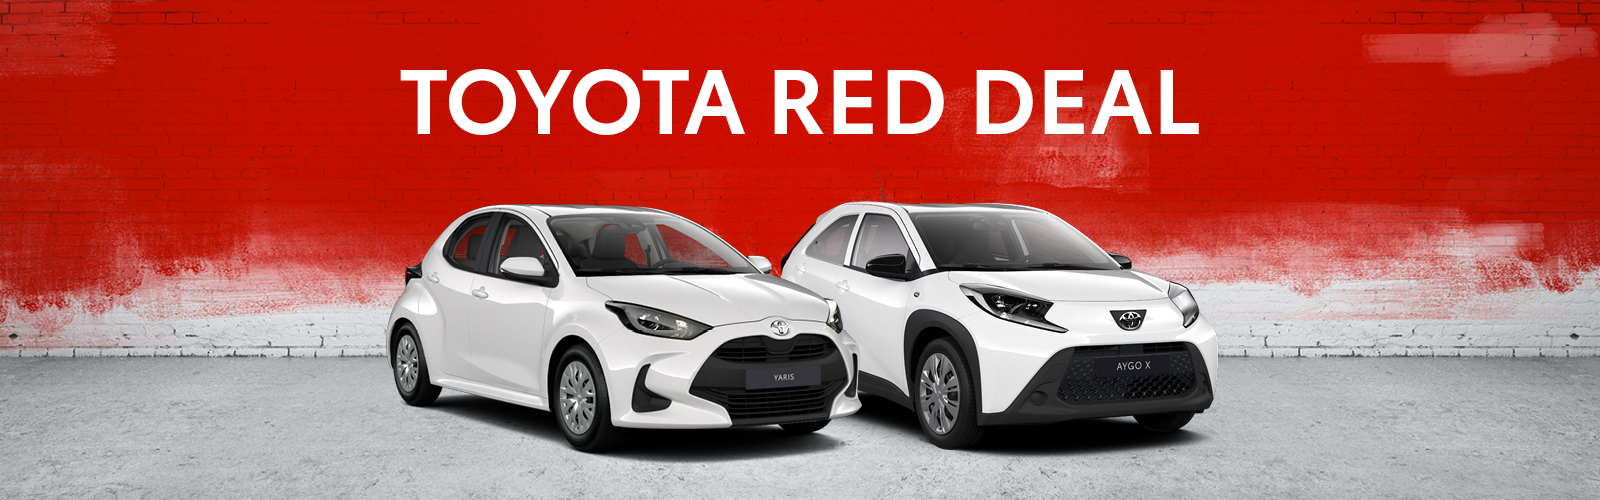 Toyota Red-Deal